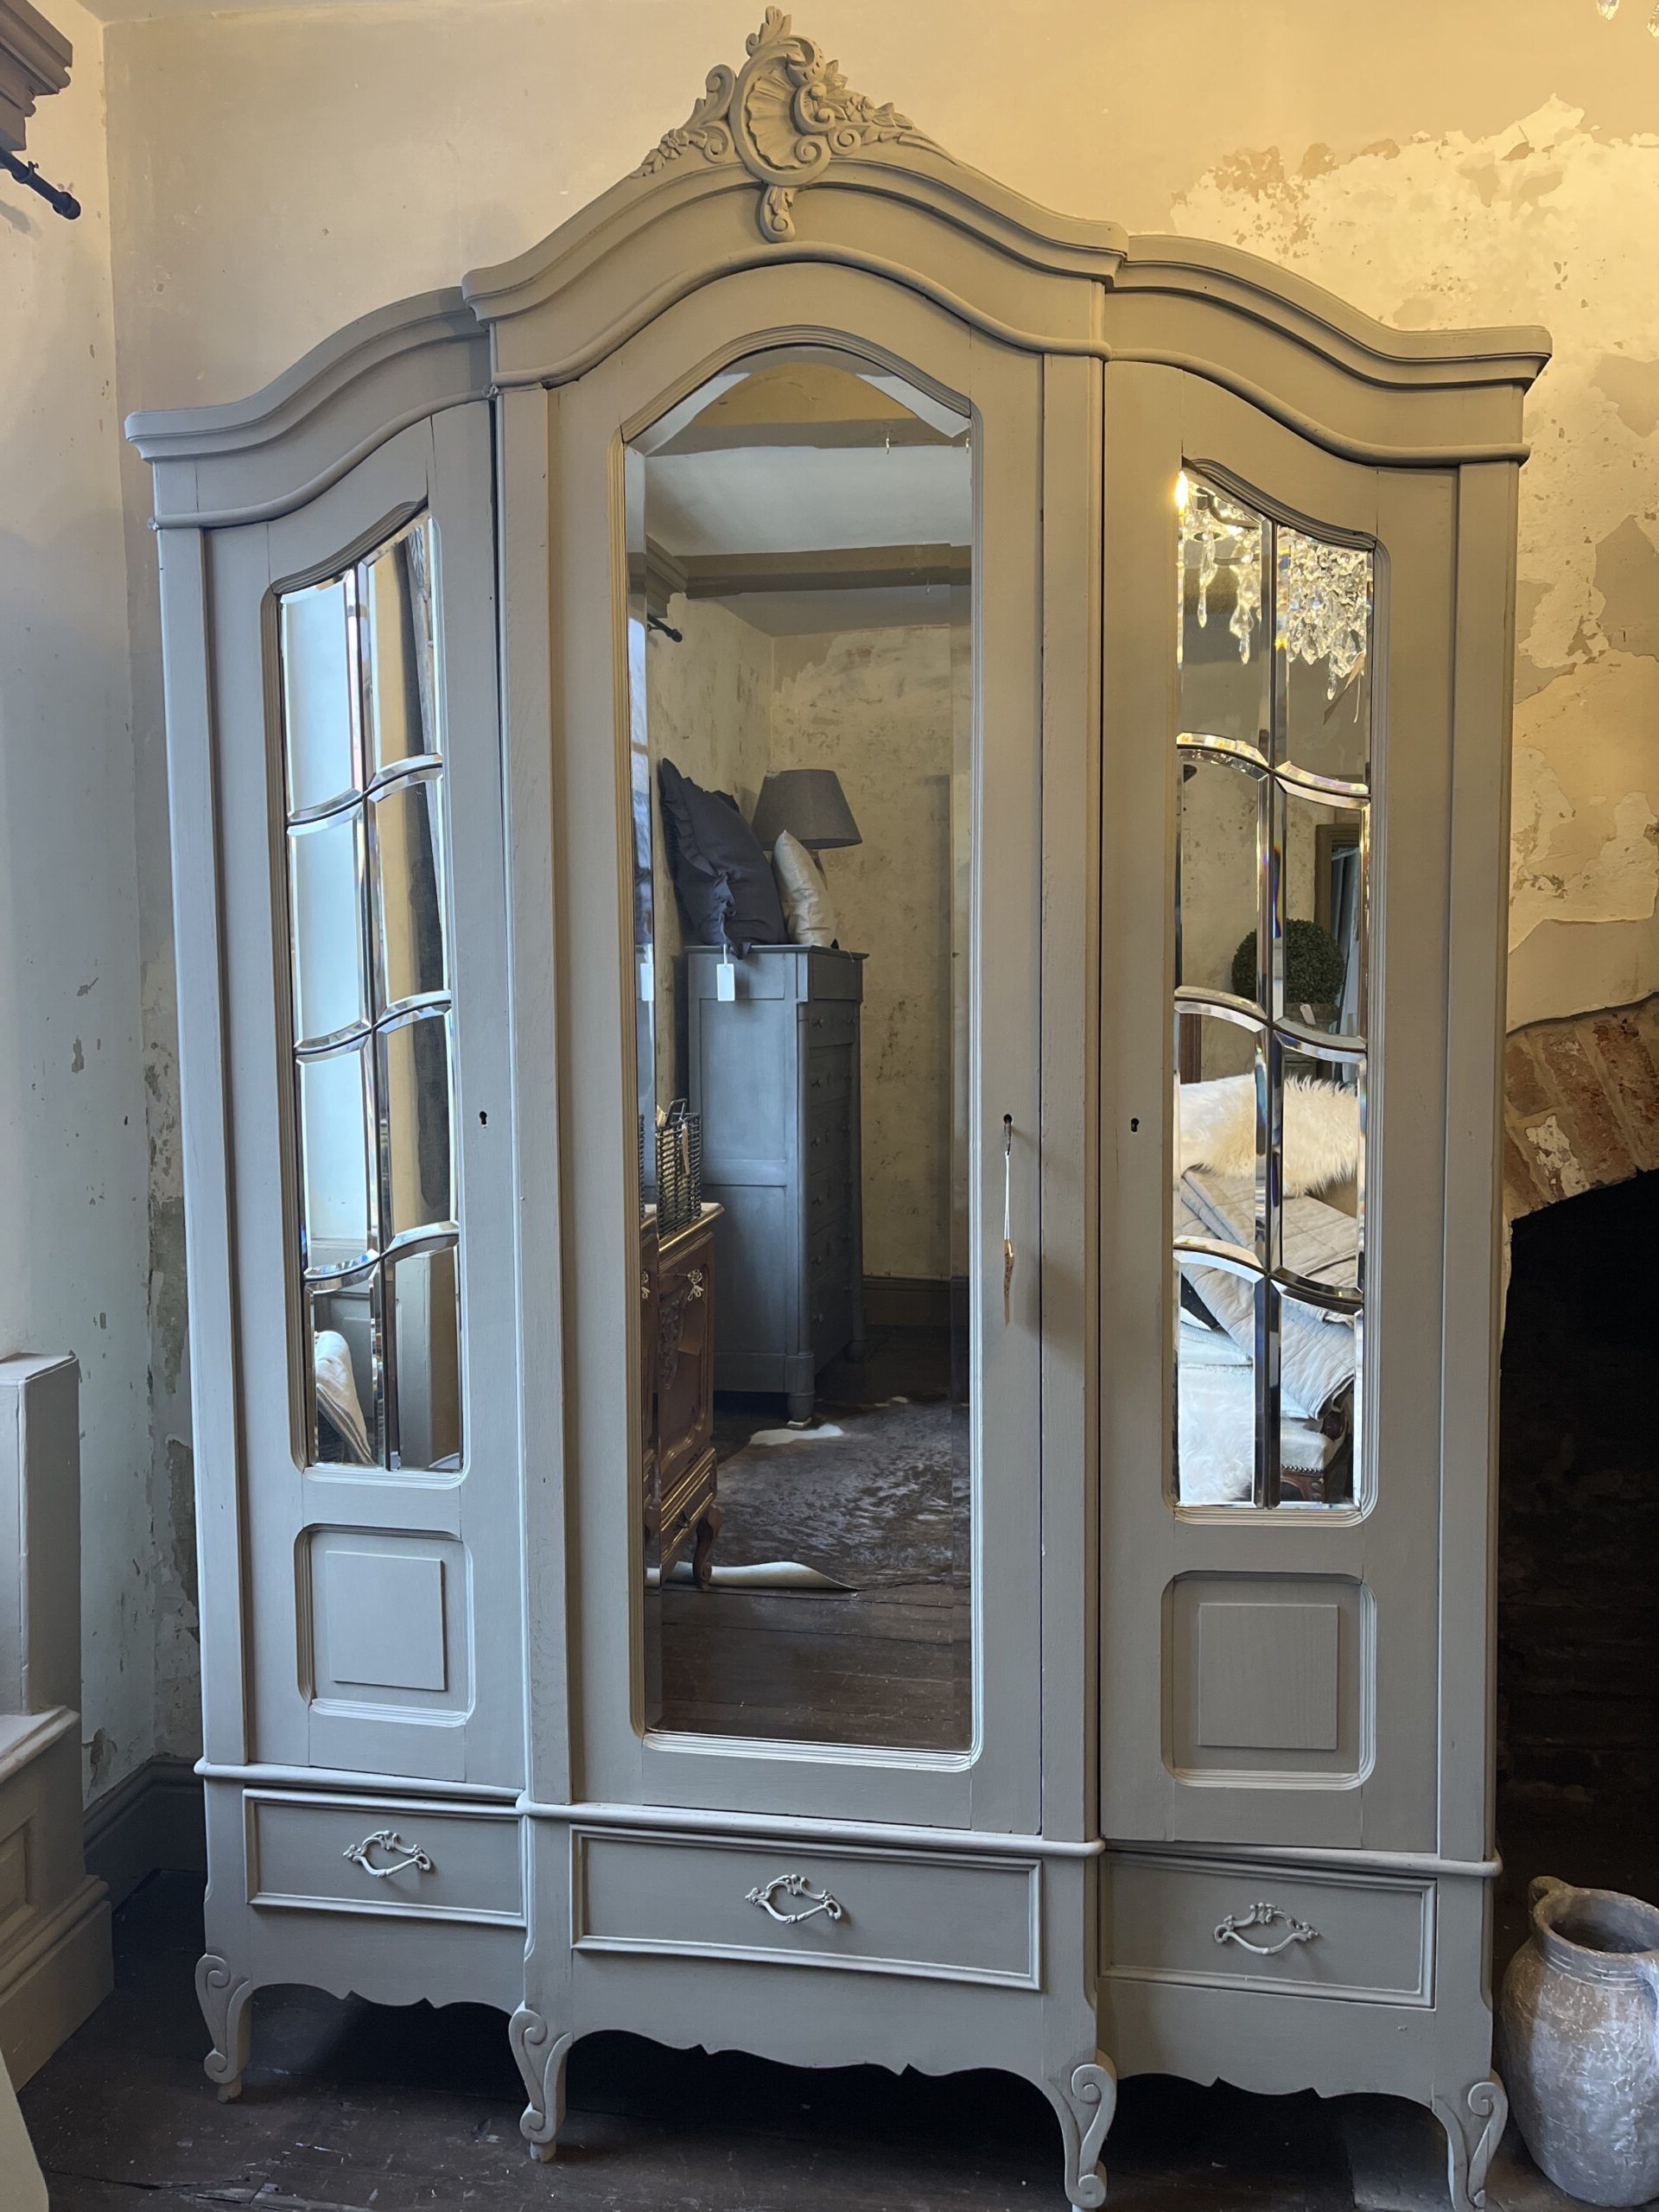 3 Door Louis Xv Painted Armoire | Village Chic In French Armoires And Wardrobes (View 9 of 20)